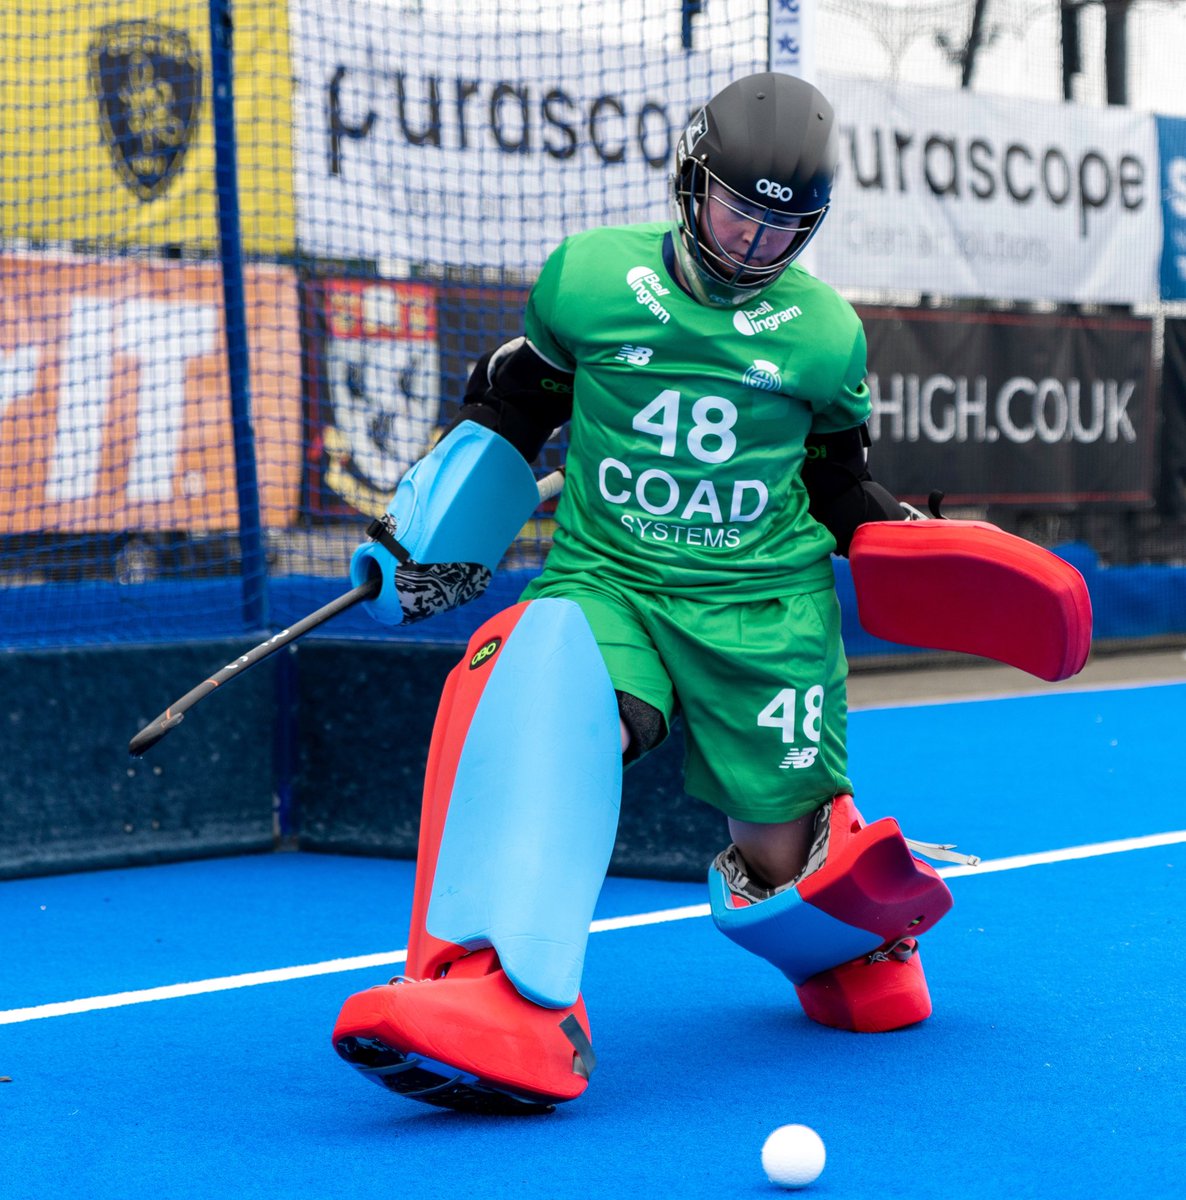 What an amazing experience for @Veritygk1 at the 4Nations this weekend. Her desire & resilience over the last 8 months just leaves you in awe. She’s definitely richer after the challenge & ready for the next one! #girlpower @ScottishHockey @UddyHockey @aratac_hockey @OBOhockeyUK